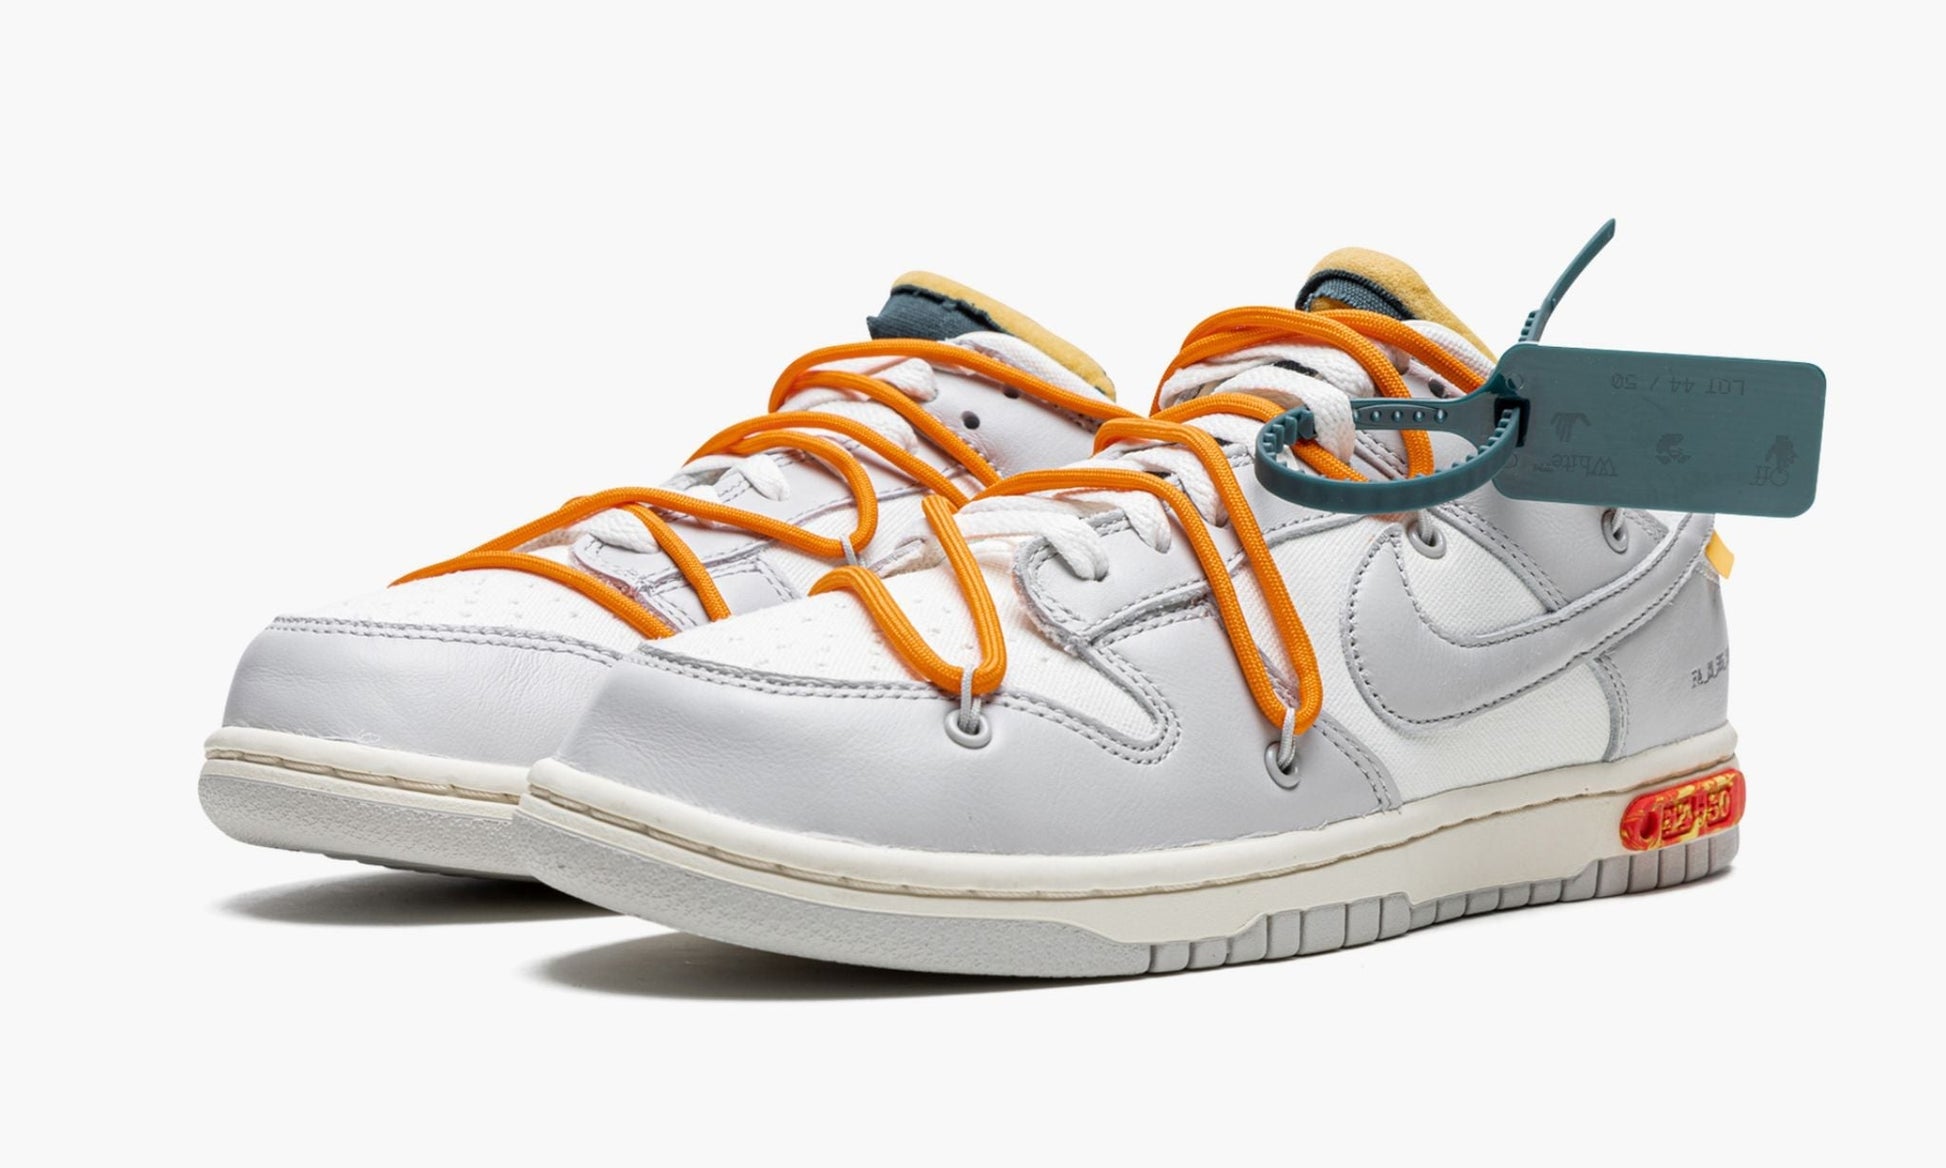 Dunk Low "Off-White - Lot 44"